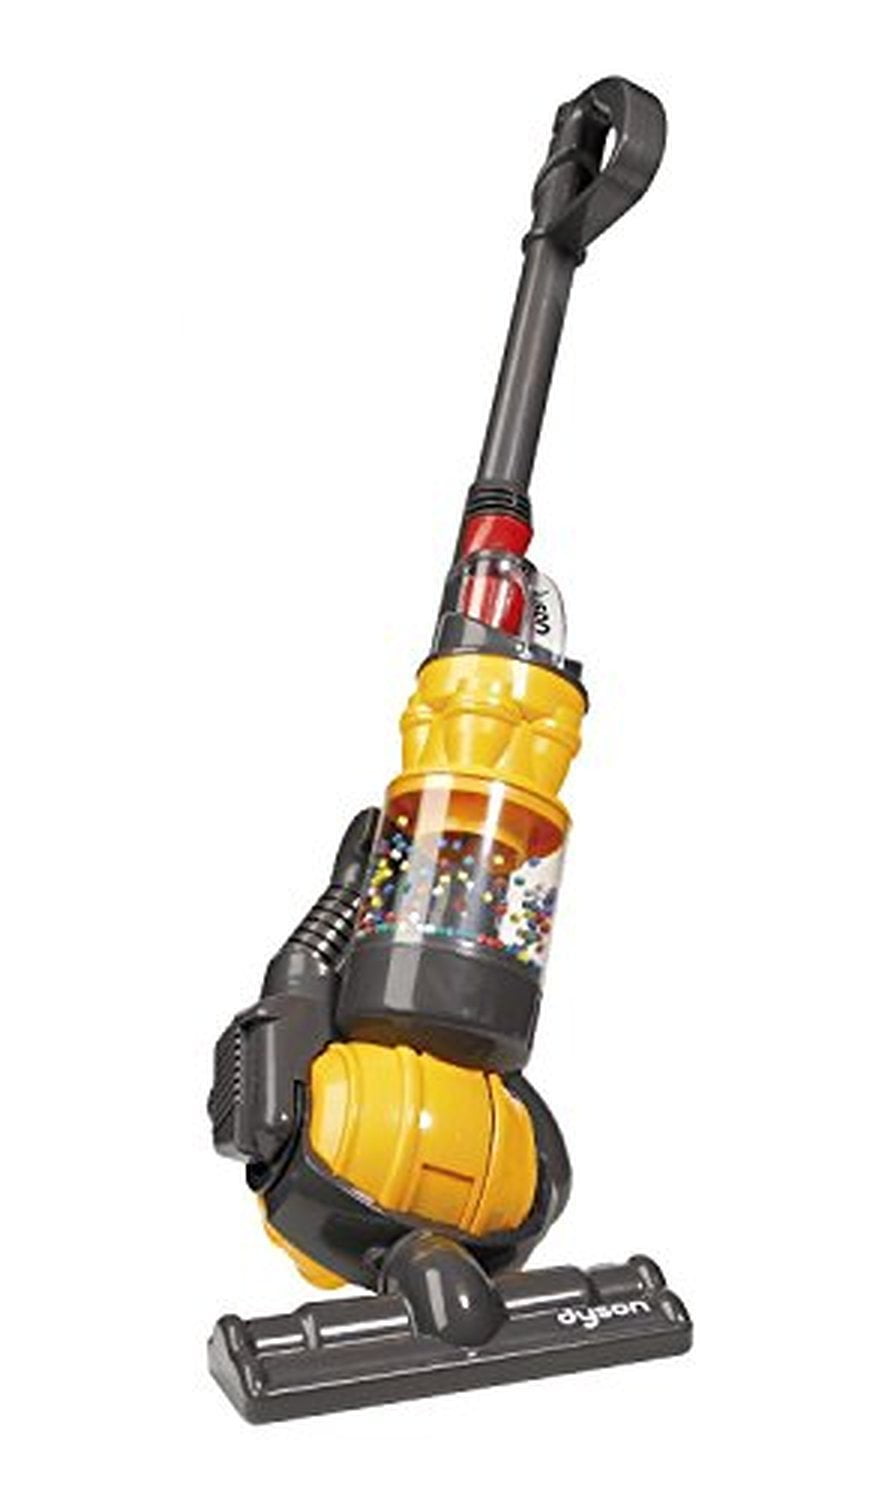 have på bladre raid Toy Vacuum- Dyson Ball Vacuum With Real Suction and Sounds - Walmart.com